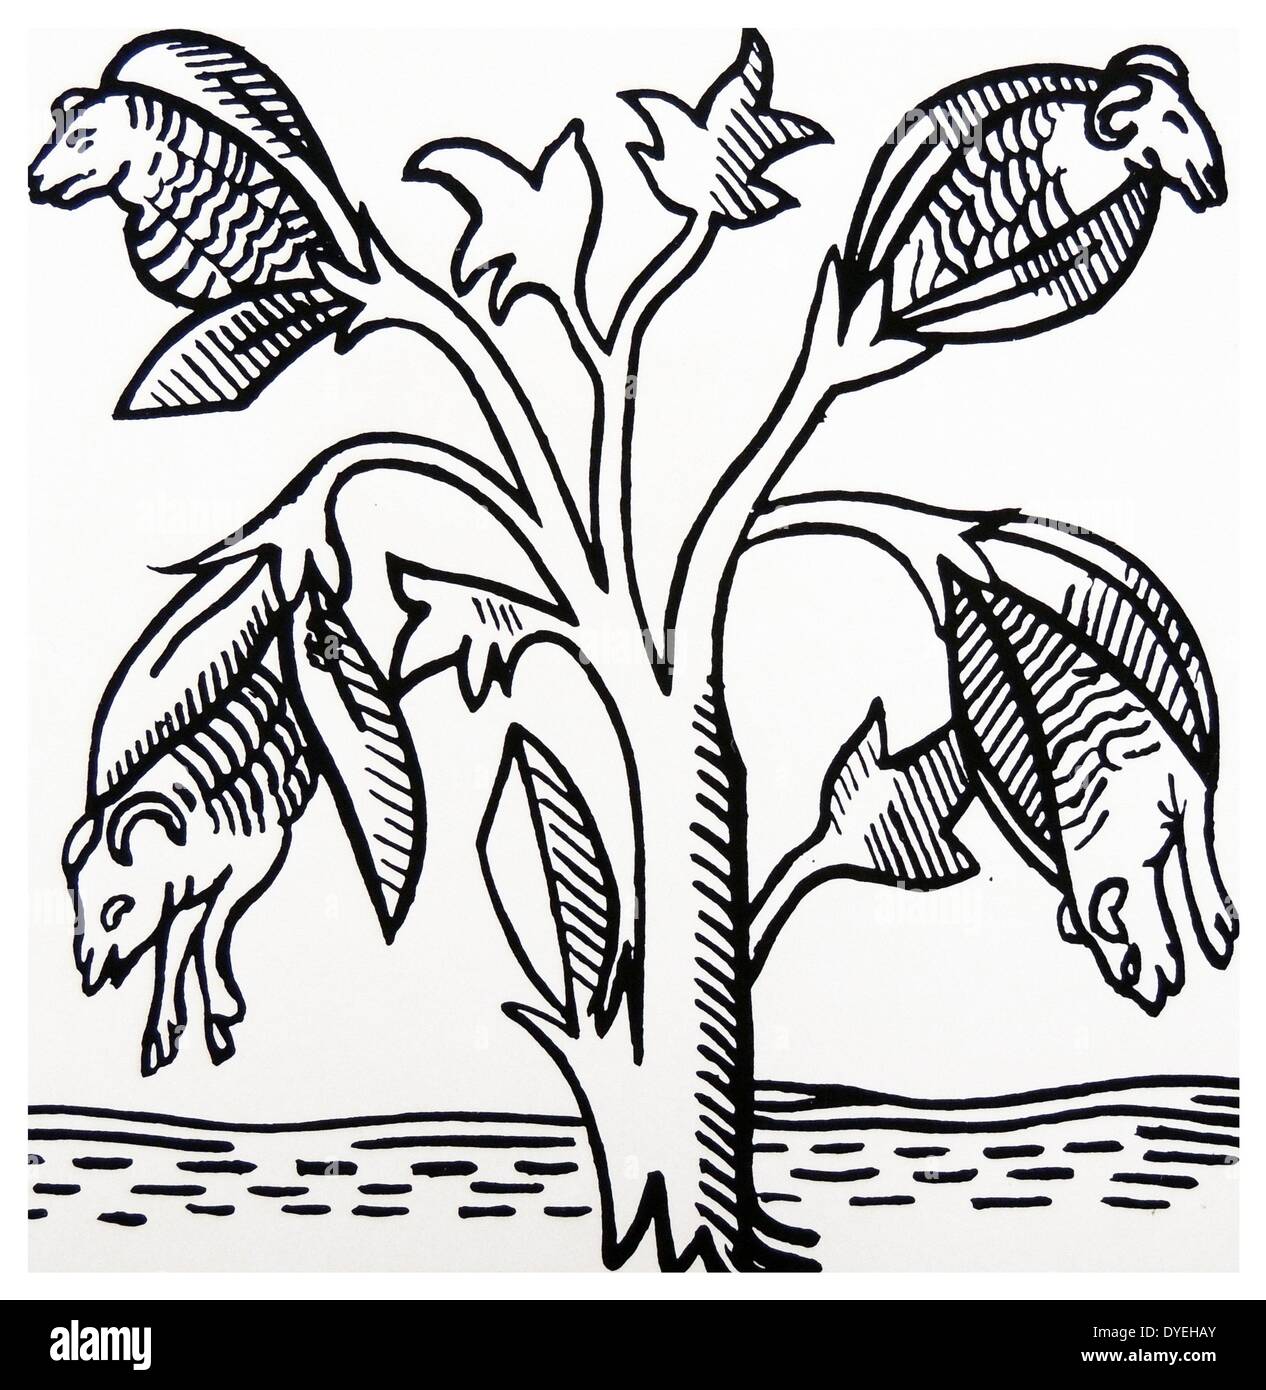 Variation of the barnacle geese legend showing lambs dropping as ripe cotton bolls from a tree.  Woodcut after ''The Voiage Travaile of Sir John Manndeville, Knt'' the story of whose legendary adventures first circulated in 1371. Stock Photo